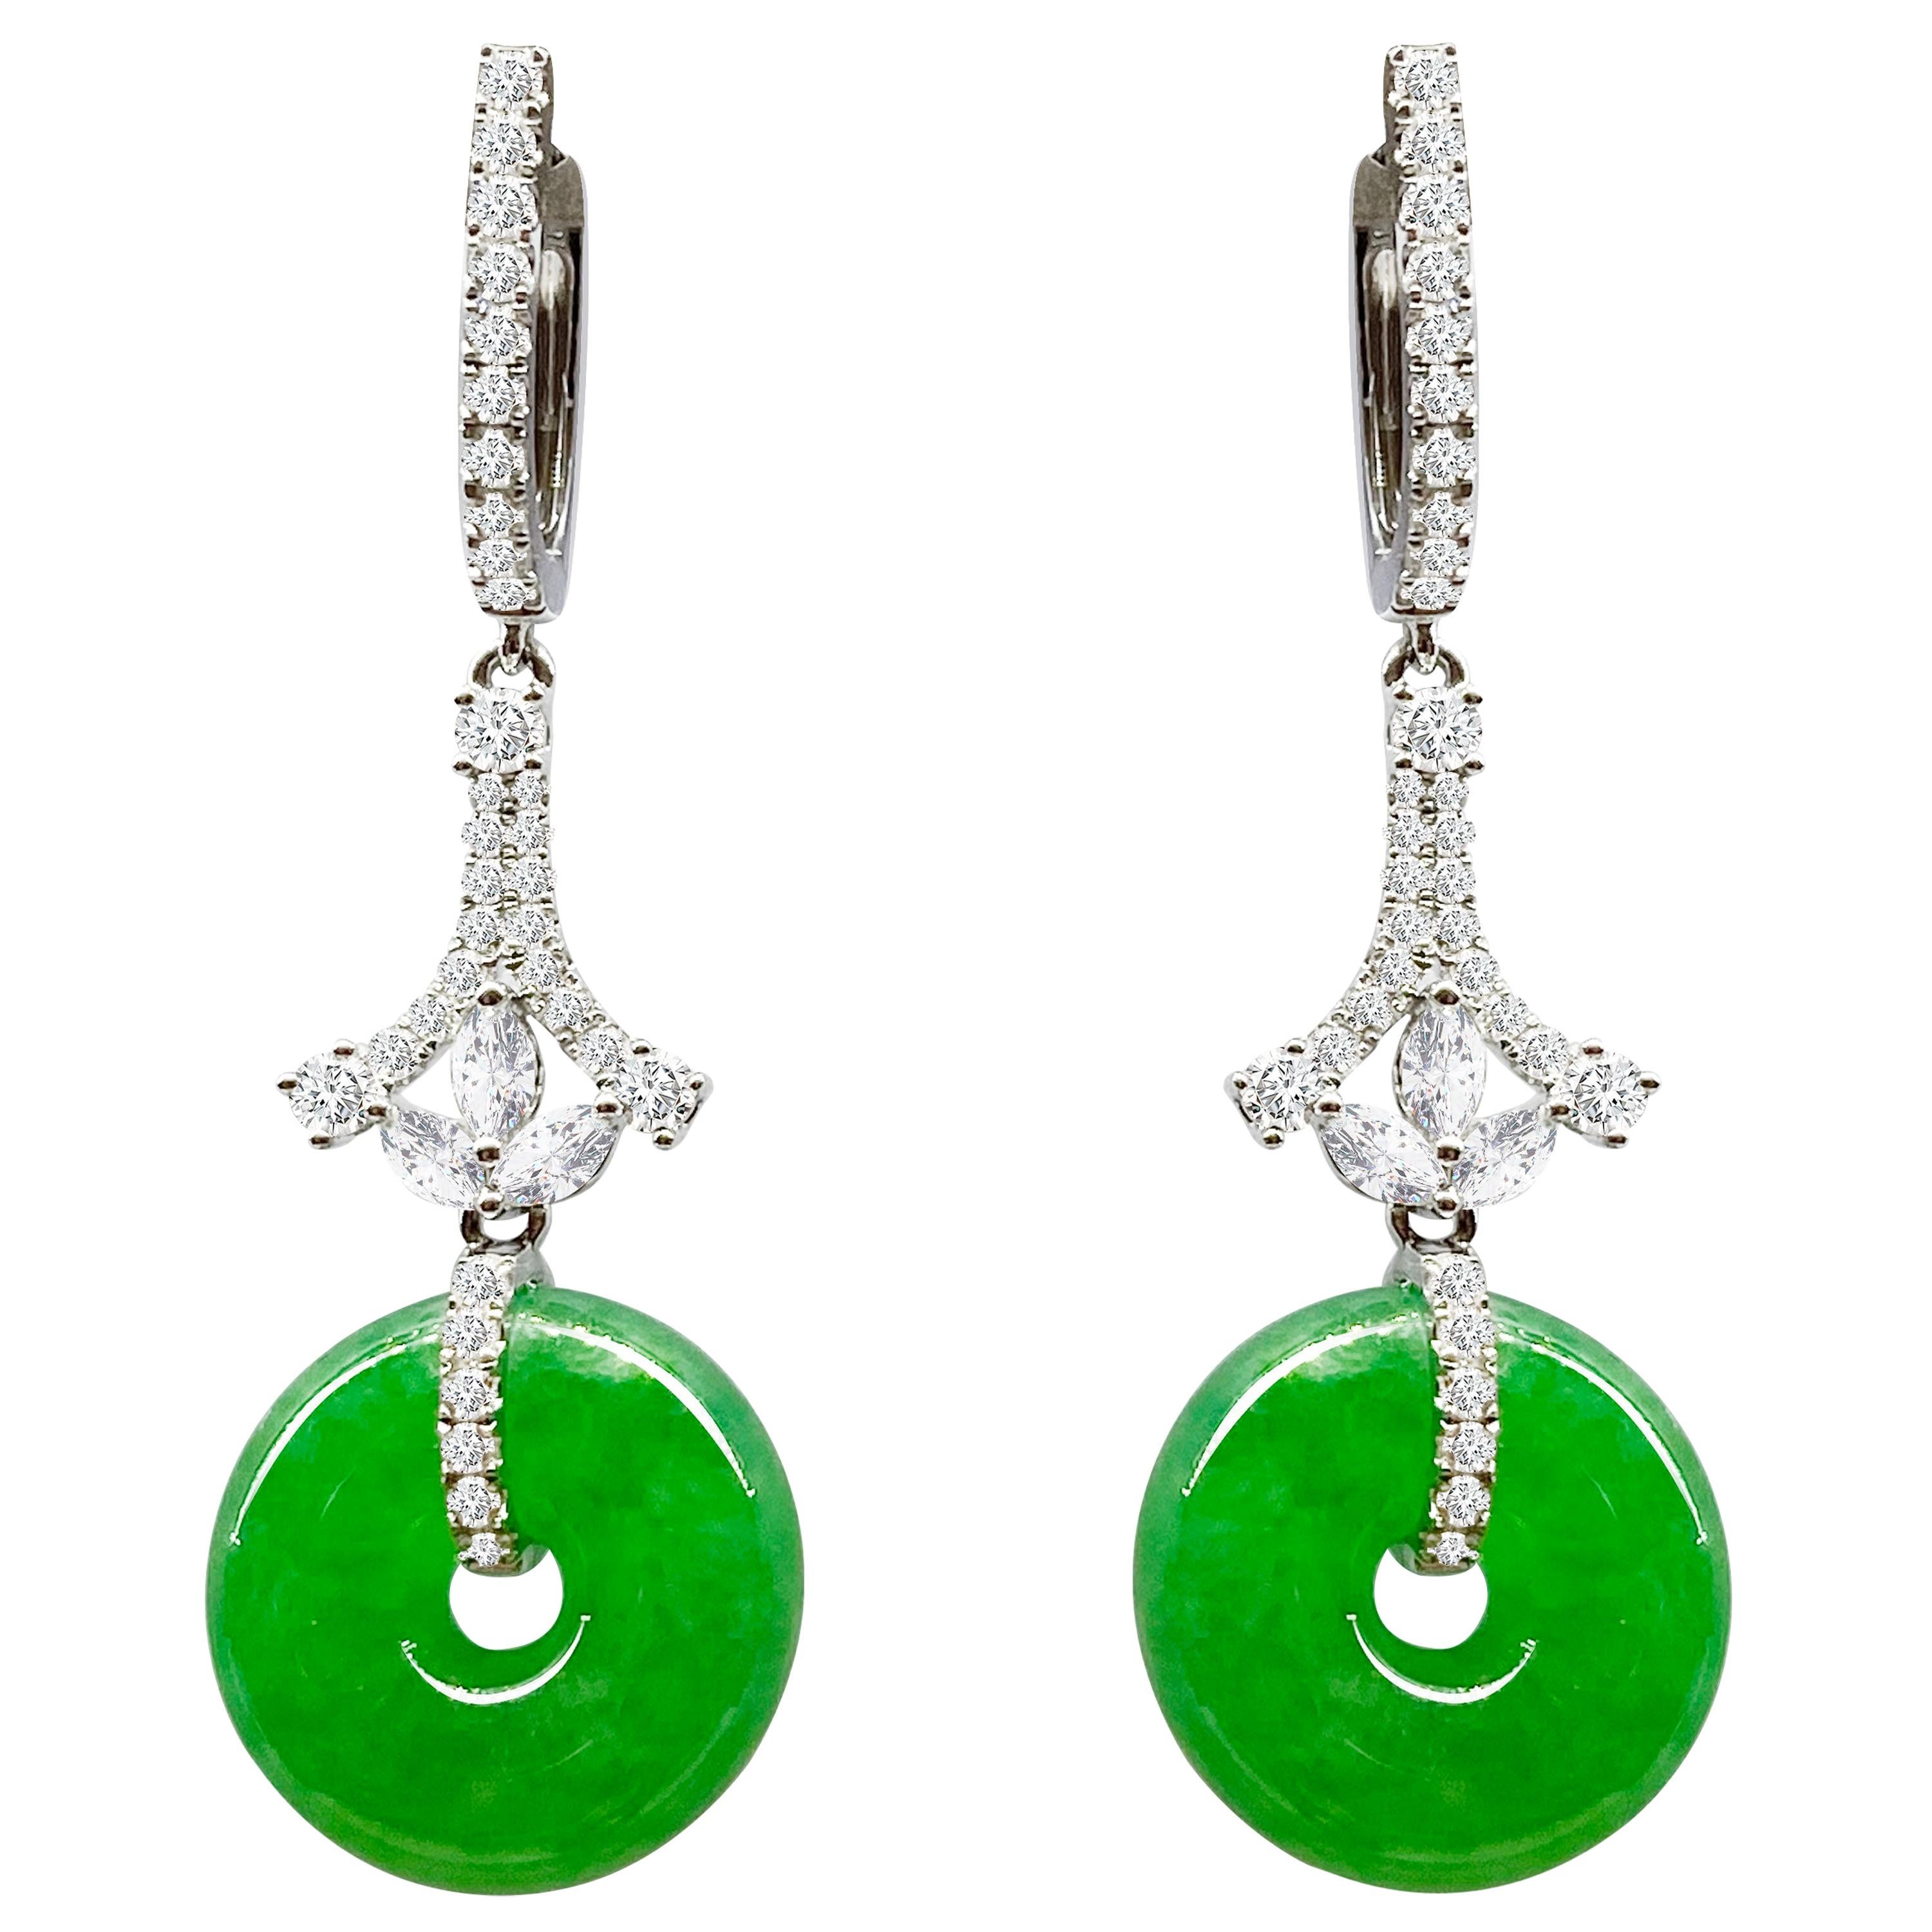 A Pair of Imperial Jadeite and Diamond Earrings in 18 Karat White Gold